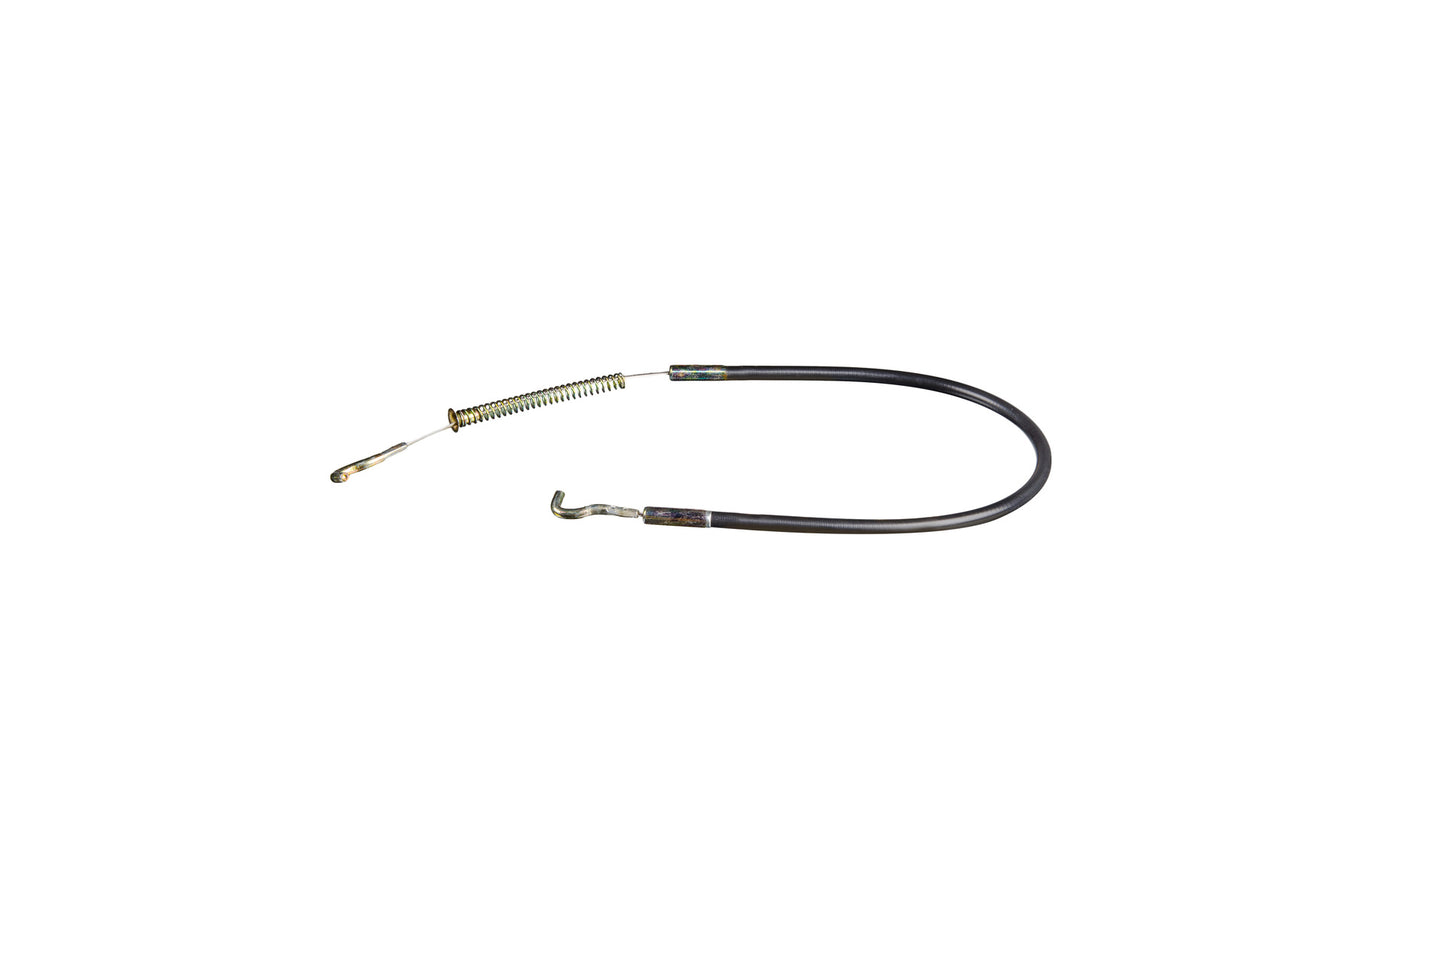 Bowden cable for door lock